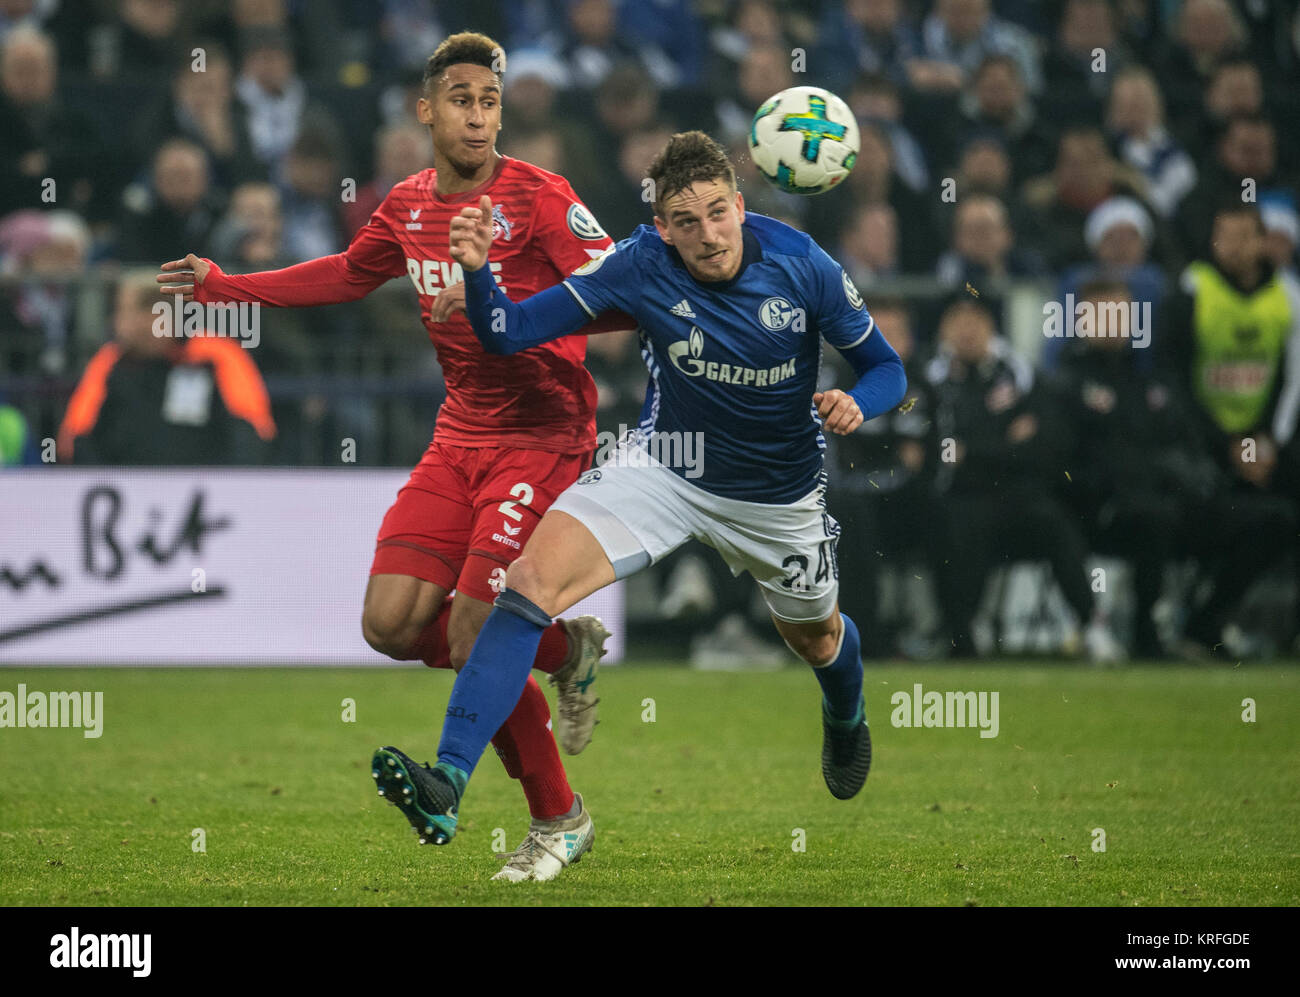 Gelsenkirchen, Germany. 19th Dec, 2017. Schalke's Bastian Oczipka (r) and Cologne's Kevin Goden in action during the German DFB Cup soccer match between FC Schalke 04 and 1. FC Cologne in the Veltins Arena in Gelsenkirchen, Germany, 19 December 2017. Credit: Bernd Thissen/dpa/Alamy Live News Stock Photo